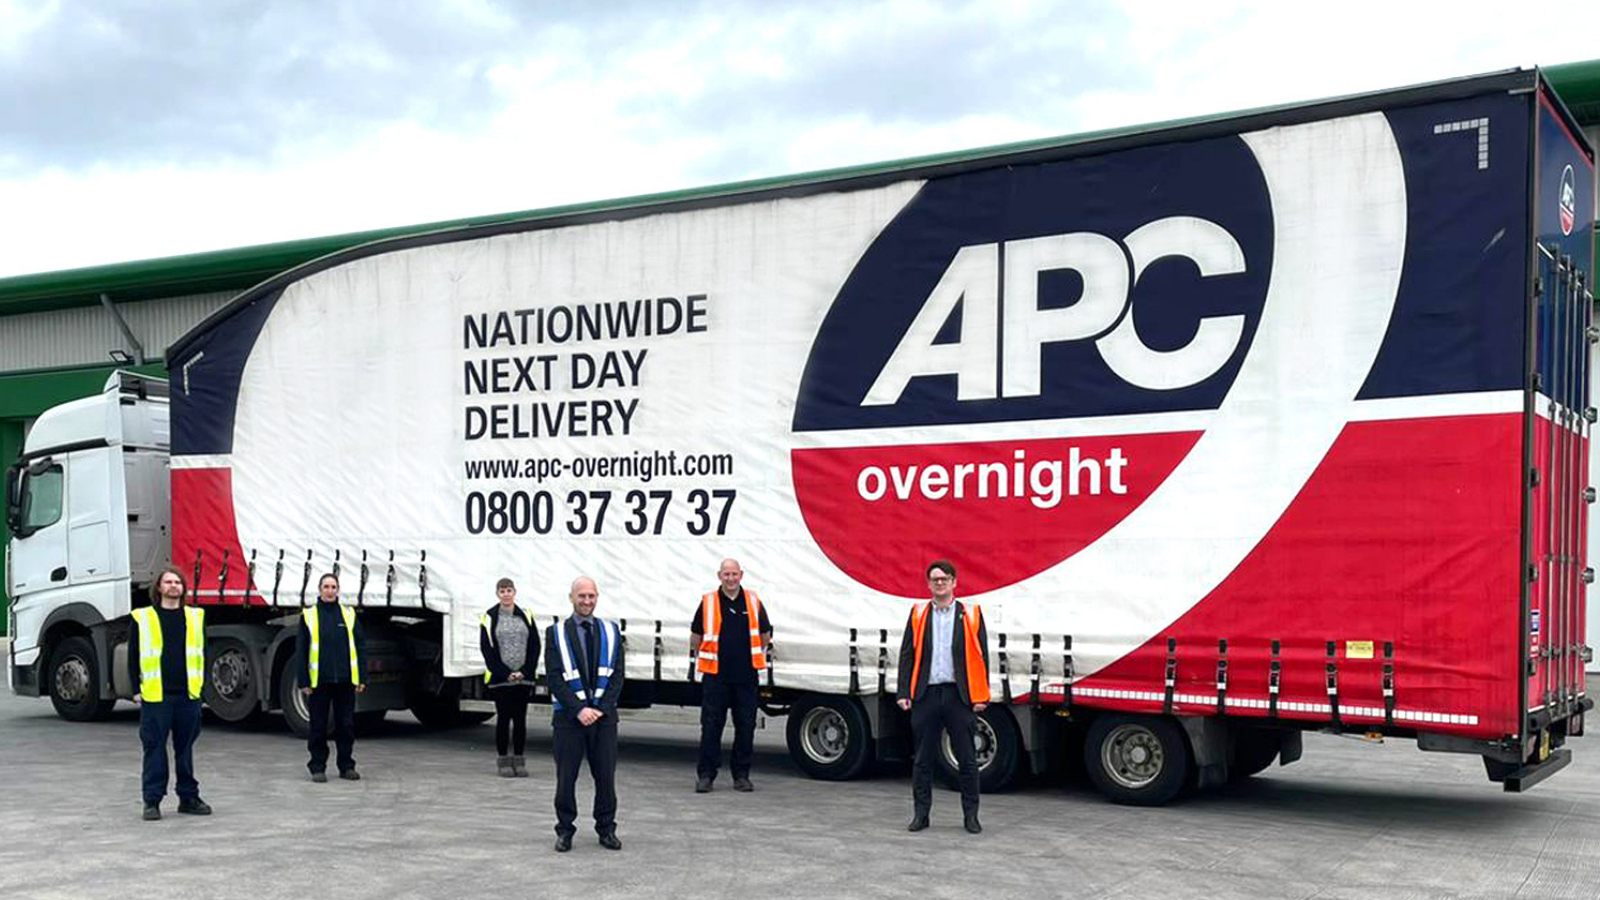 APC Overnight - Nationwide next day delivery